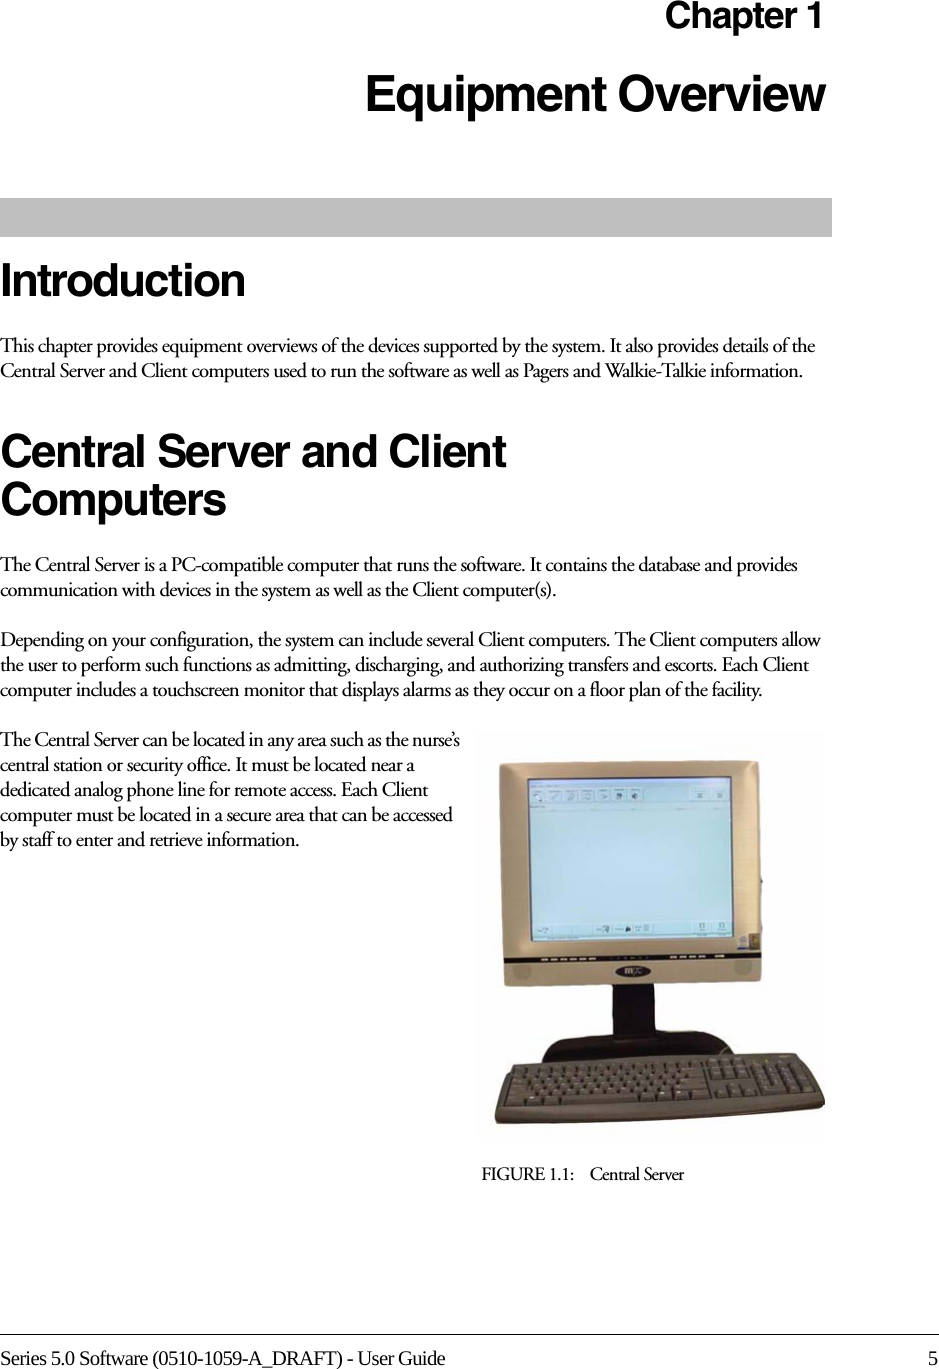 Series 5.0 Software (0510-1059-A_DRAFT) - User Guide 5Chapter 1Equipment Overview IntroductionThis chapter provides equipment overviews of the devices supported by the system. It also provides details of the Central Server and Client computers used to run the software as well as Pagers and Walkie-Talkie information. Central Server and Client ComputersThe Central Server is a PC-compatible computer that runs the software. It contains the database and provides communication with devices in the system as well as the Client computer(s). Depending on your configuration, the system can include several Client computers. The Client computers allow the user to perform such functions as admitting, discharging, and authorizing transfers and escorts. Each Client computer includes a touchscreen monitor that displays alarms as they occur on a floor plan of the facility.The Central Server can be located in any area such as the nurse’s central station or security office. It must be located near a dedicated analog phone line for remote access. Each Client computer must be located in a secure area that can be accessed by staff to enter and retrieve information. FIGURE 1.1:    Central Server